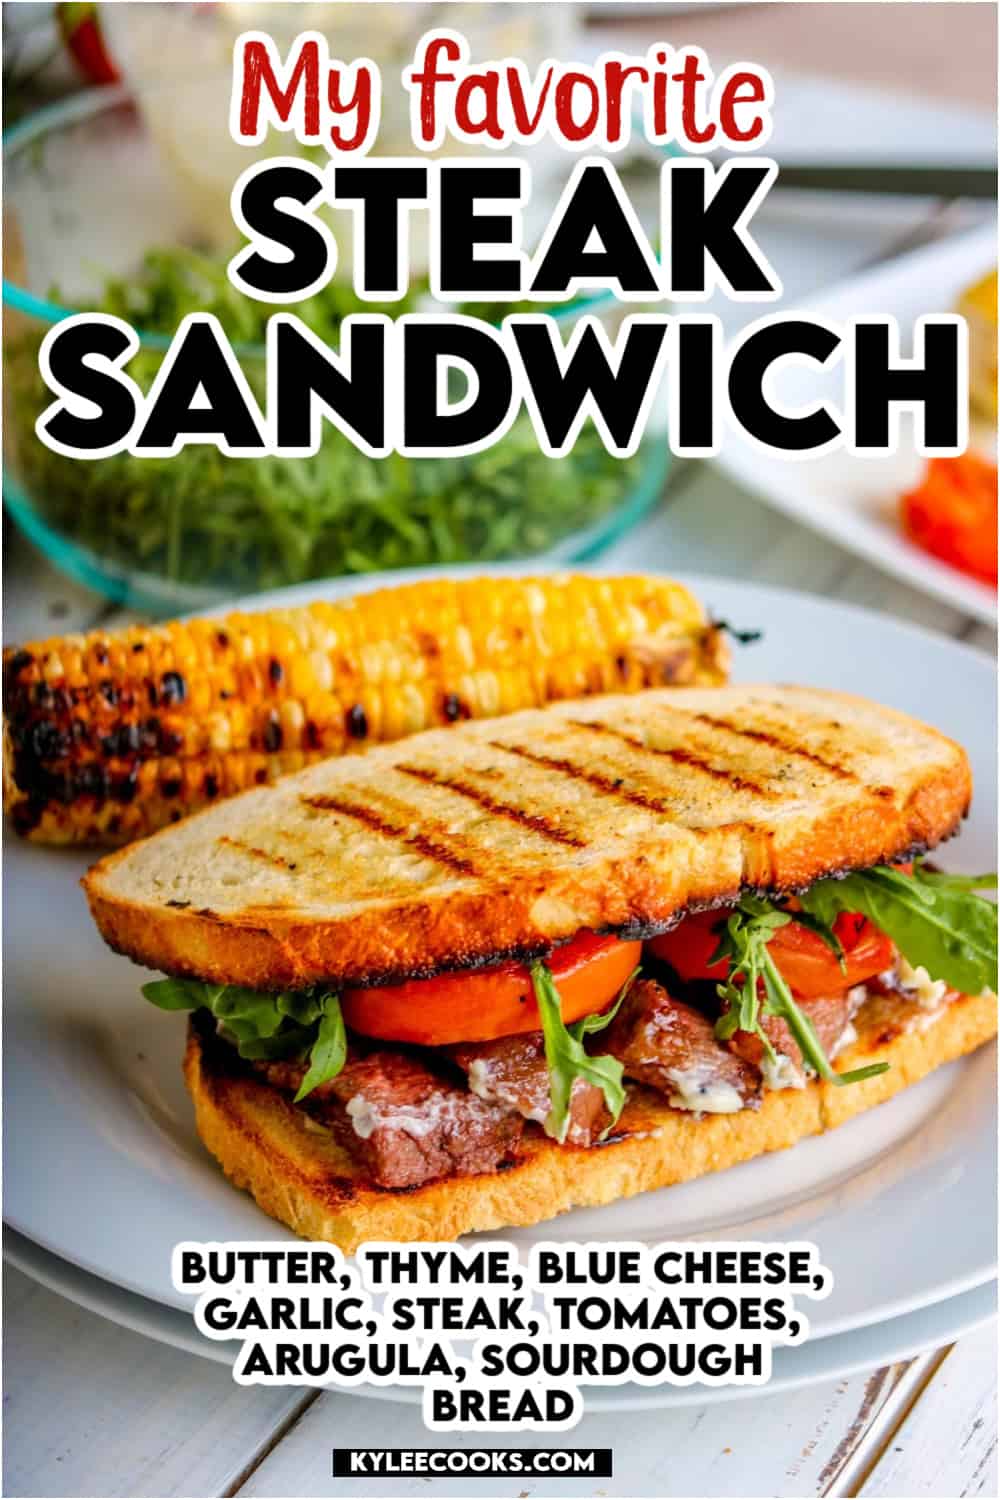 a steak sandwich with grilled bread on a white plate with recipe name and ingredients overlaid in text.